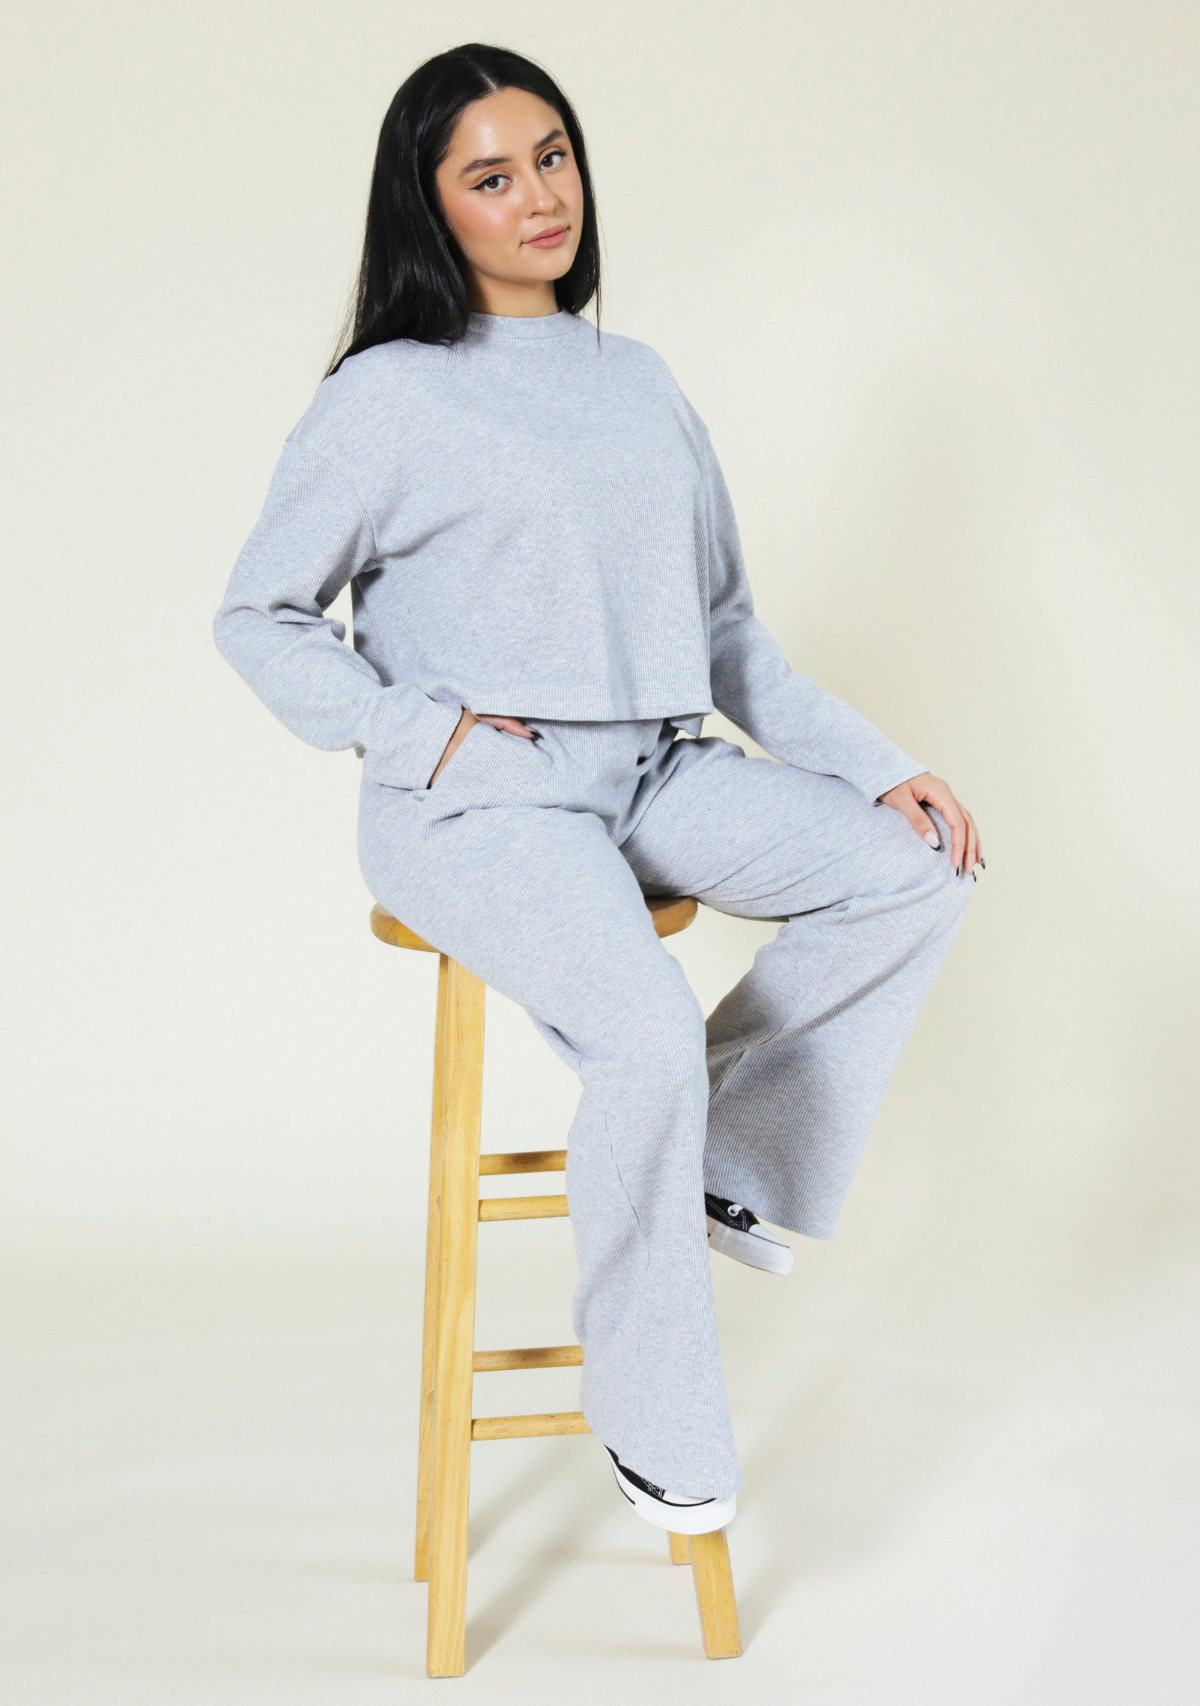 Organic Cotton Pajama Waffle Top Women's Sizes XS-3X made ethically in California.